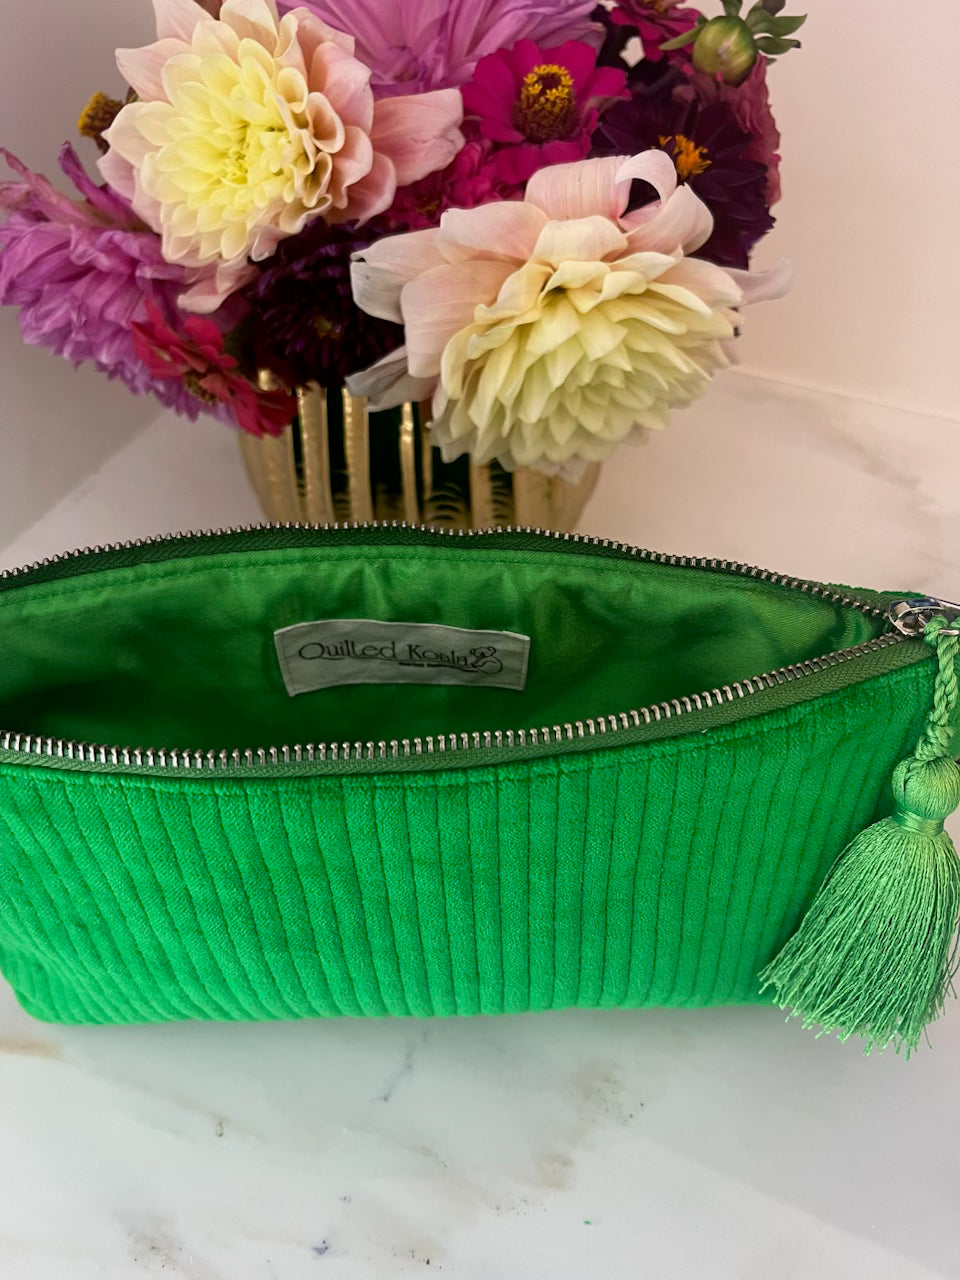 NEW! Quilted Velvet Hold Me Clutch - Electric Green - Quilted Koala